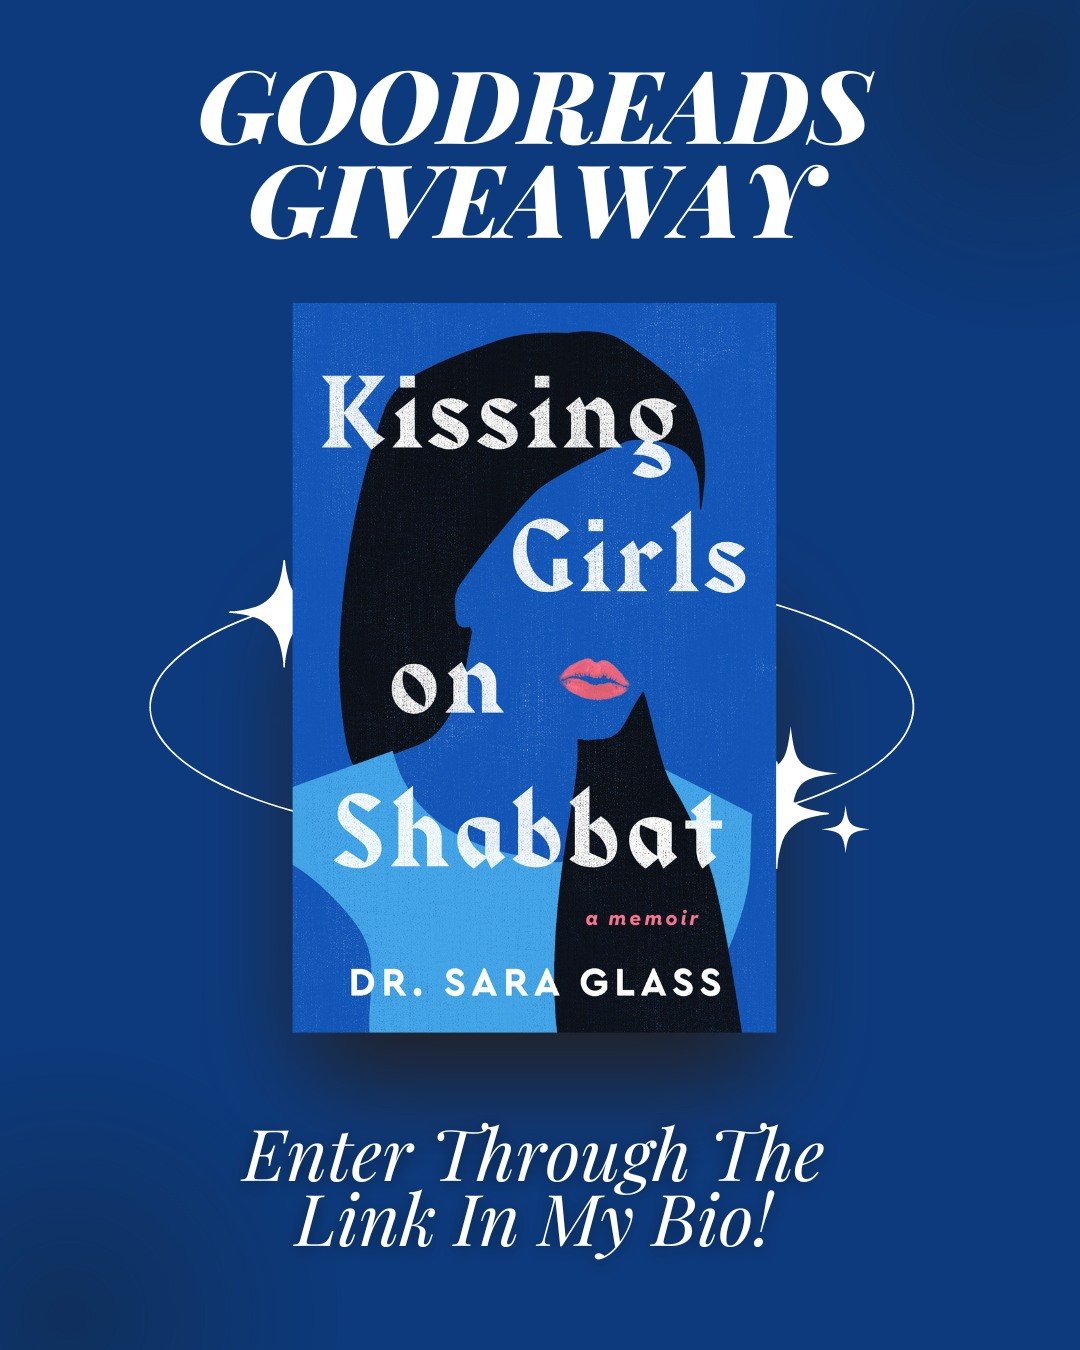 🔔Today is the LAST DAY you can enter to win a free copy of Kissing Girls on Shabbat through @goodreads! 

Use the link in my bio to enter today! The only requirements are that you must have a Goodreads account and a U.S. address to enter. 

Good luc